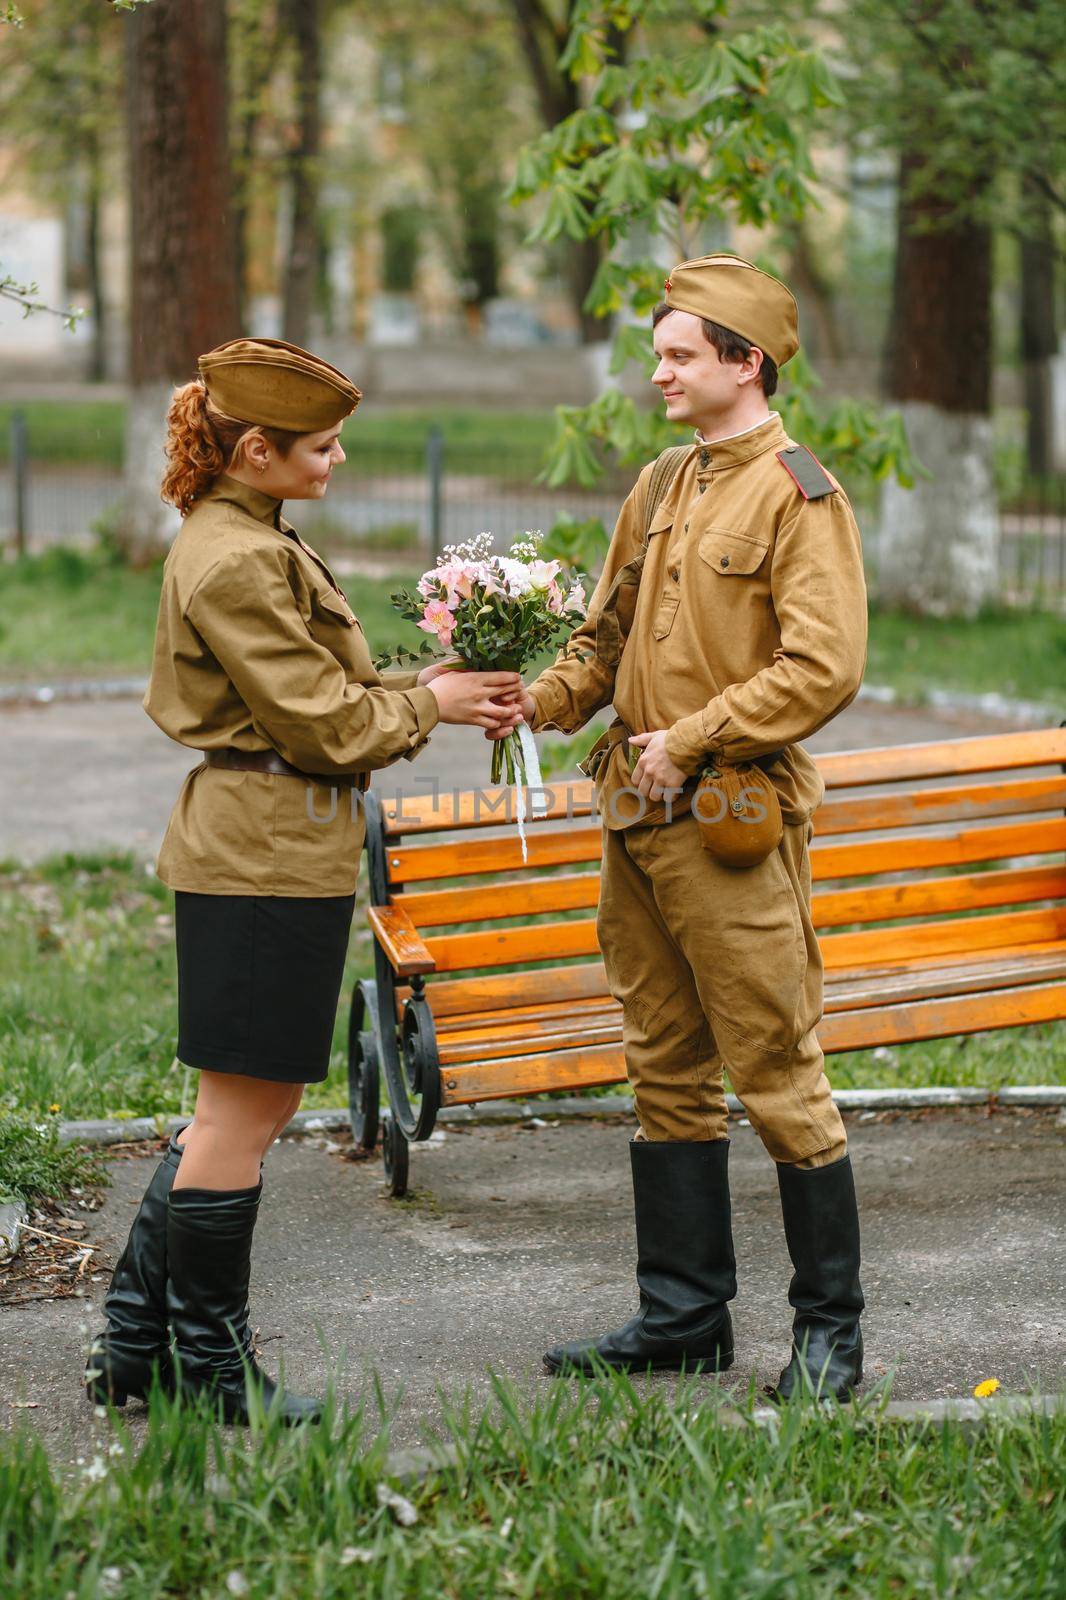 A soldier gives a girl a bouquet. People in world war II uniforms by deandy